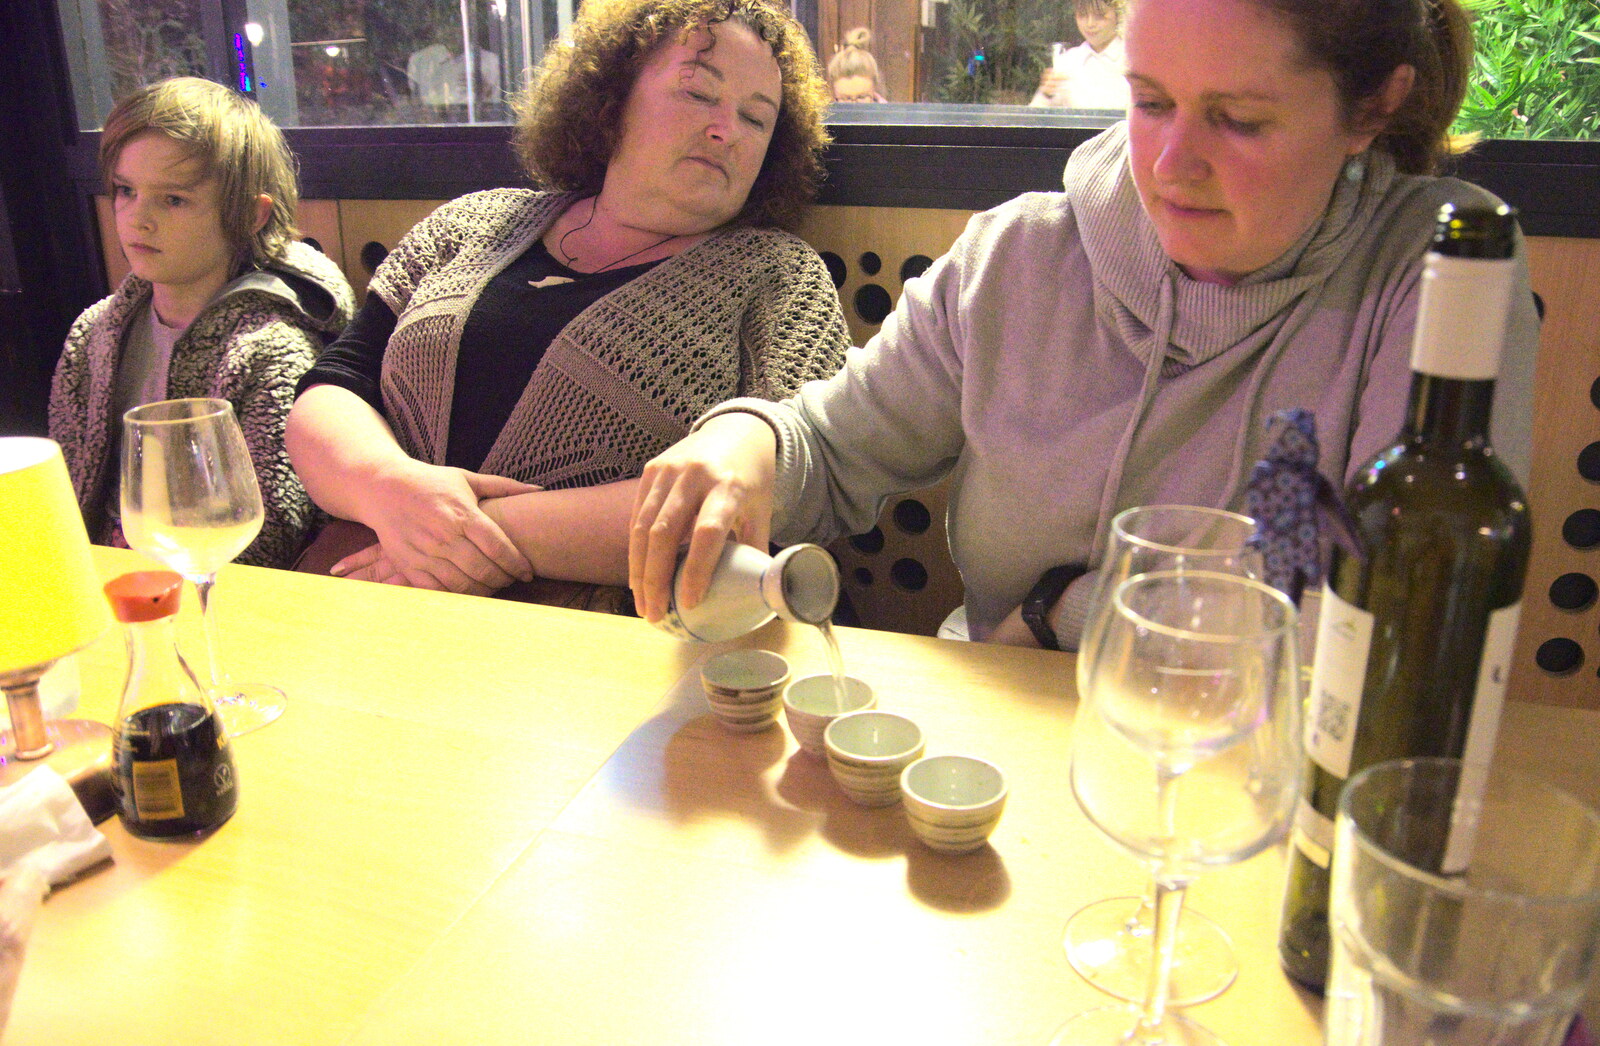 Blackrock North and Newgrange, County Louth, Ireland - 16th February 2023: Isobel pours a bit of sake